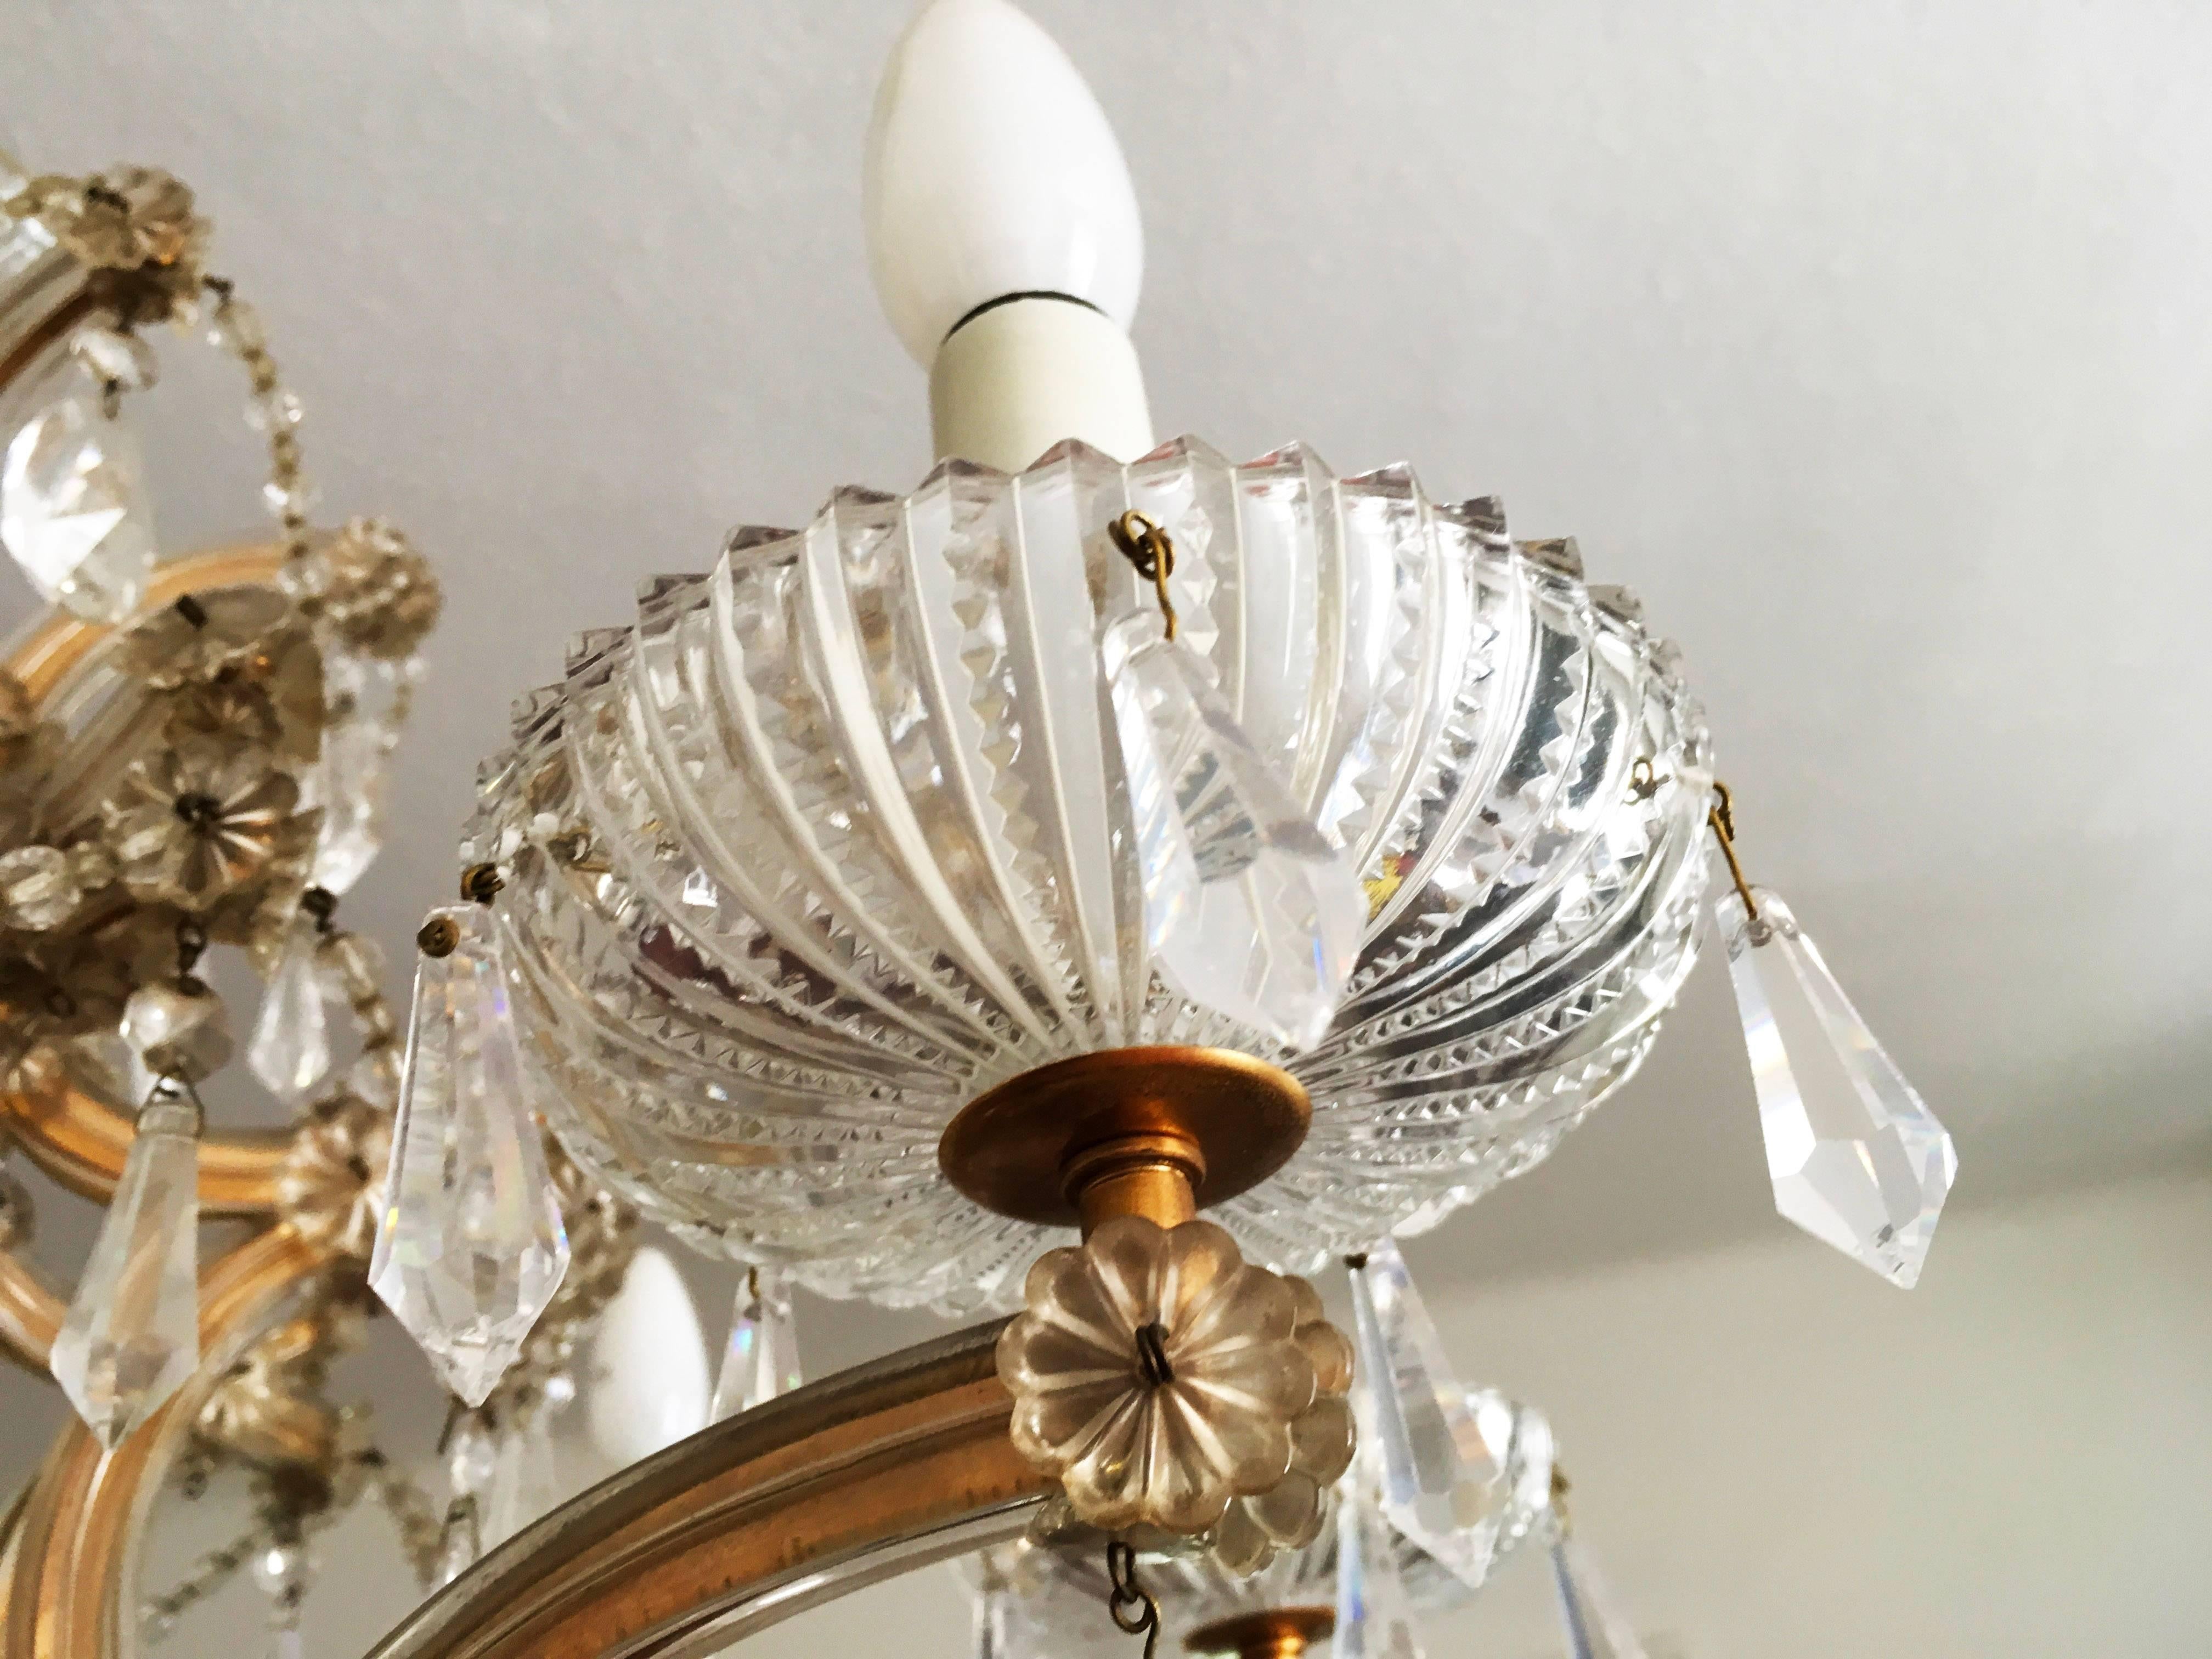 Brass/cut crystal chandelier in Maria Theresia style made in the 1960s probably by Lobmeyr in Vienna.
A beautiful form body. Eight flamed fitted with E14 sockets, rich hangings from the various faceted crystal.